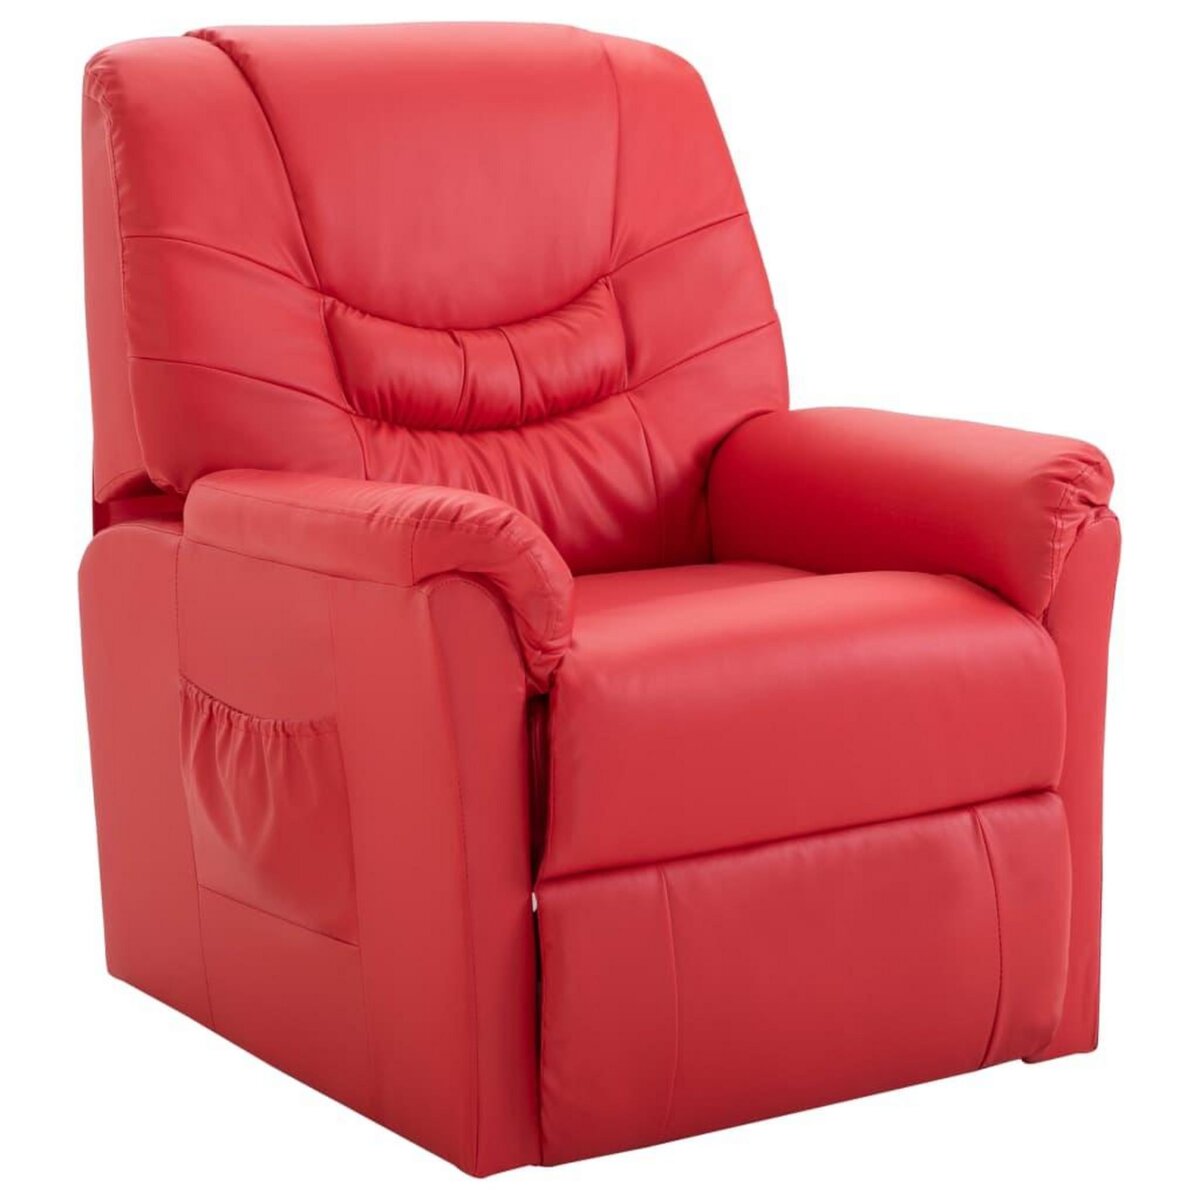 VIDAXL Chaise inclinable Rouge Similicuir